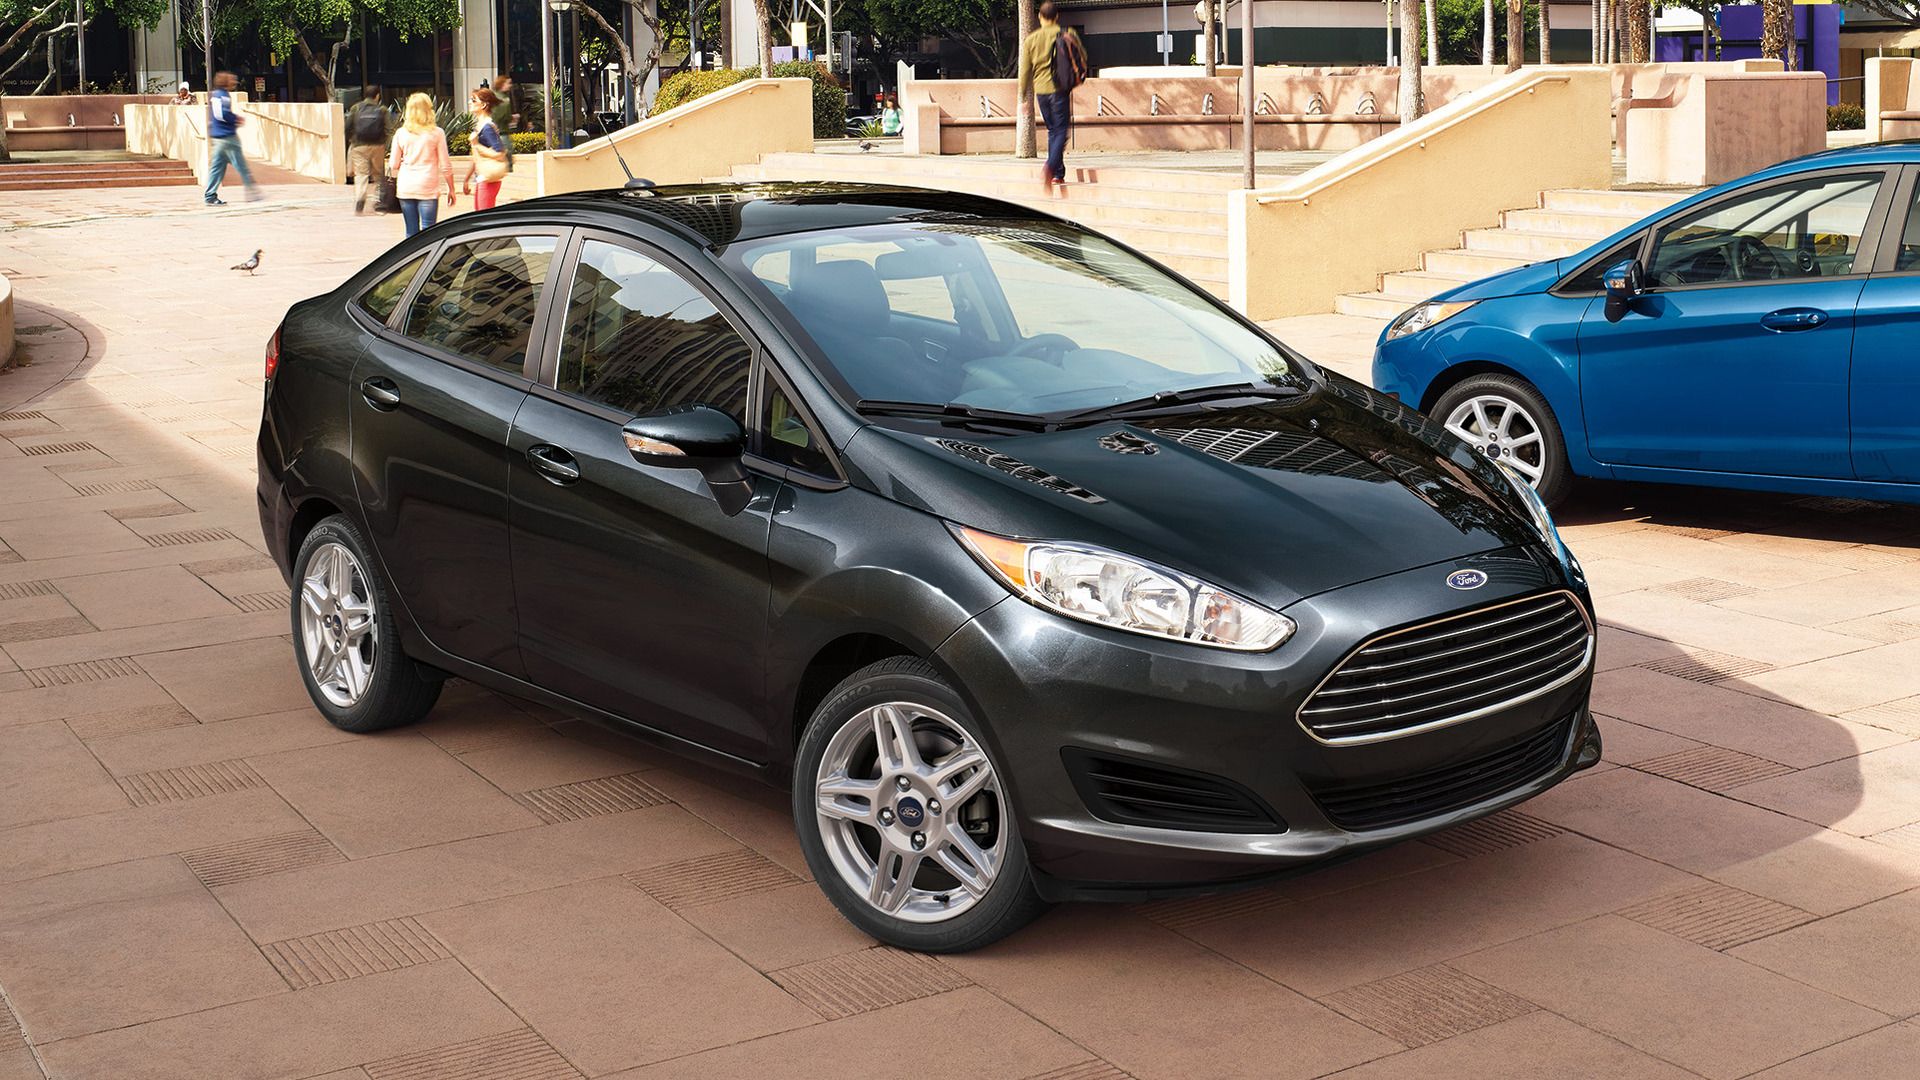 A 2018 Ford Fiesta Sedan parked next to a Ford Fiesta hatchback.